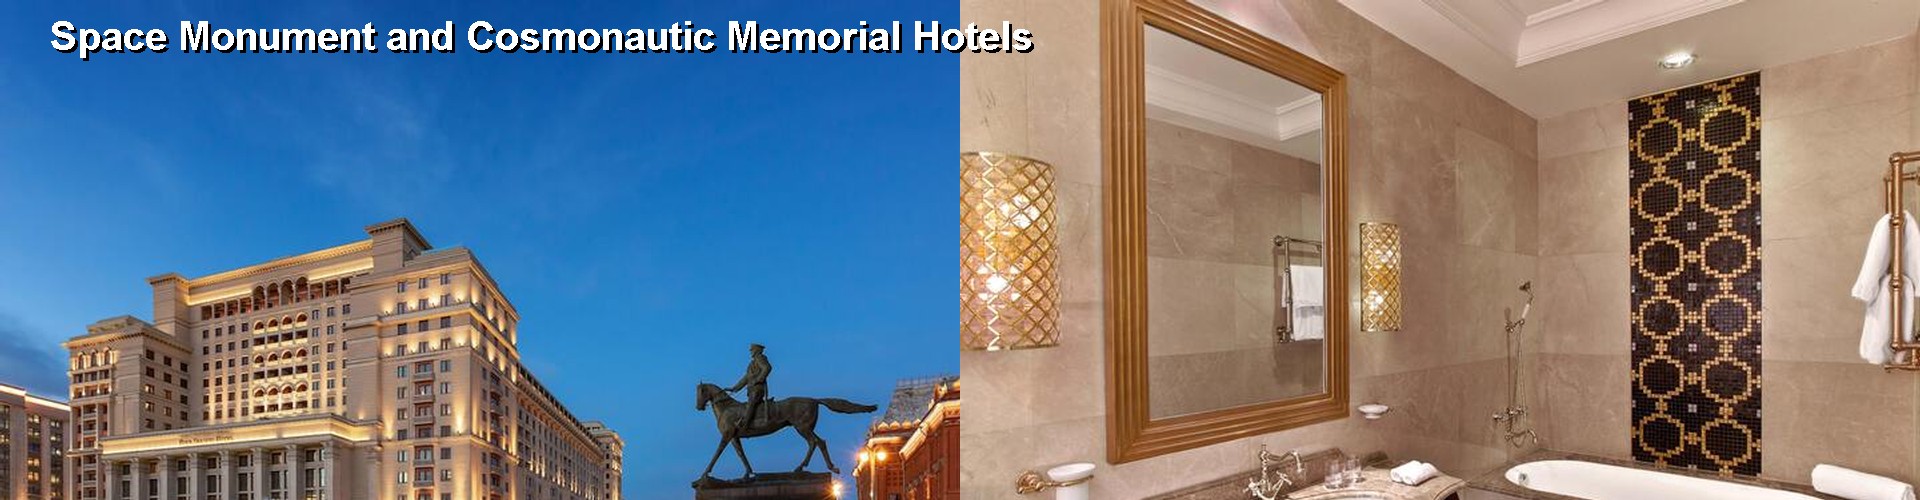 5 Best Hotels near Space Monument and Cosmonautic Memorial